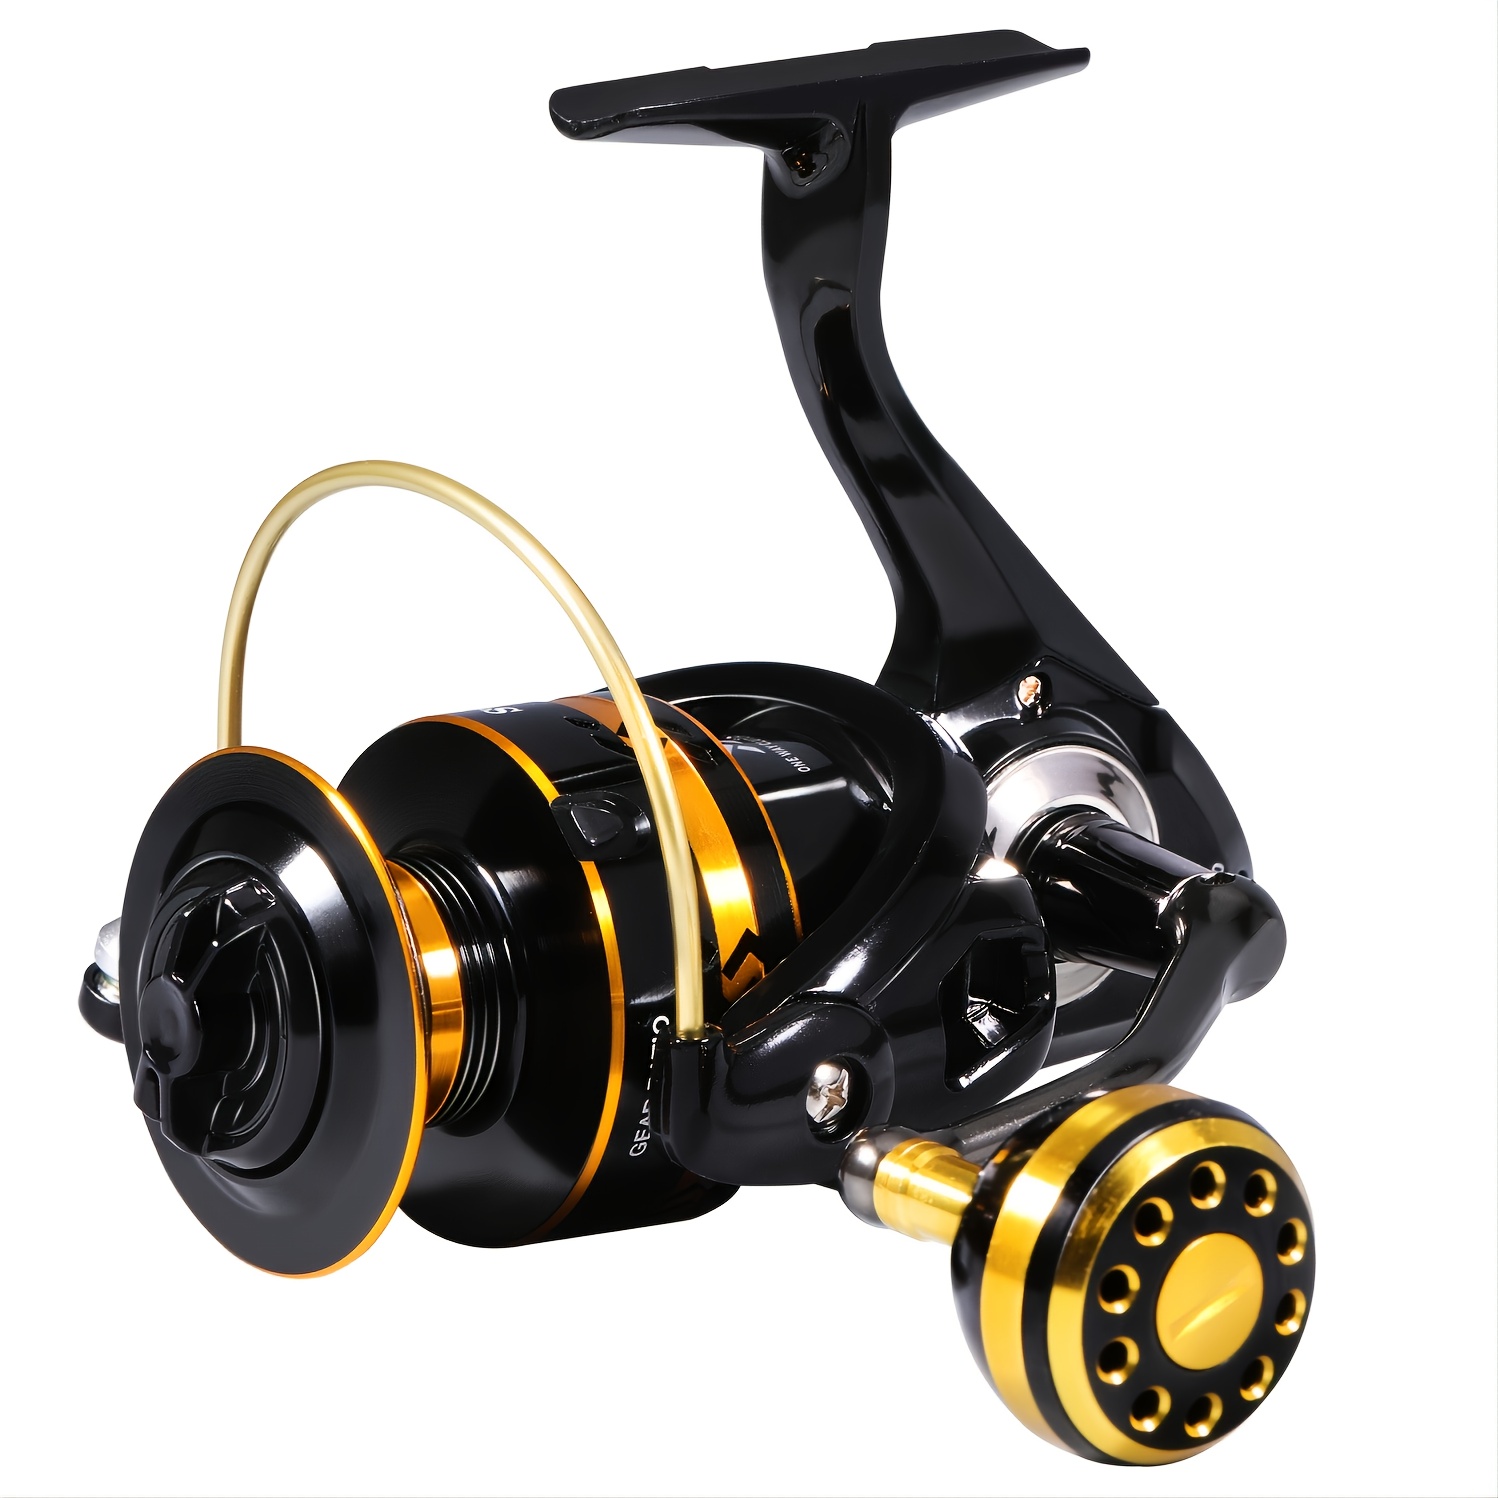 Sougayilang 33Lbs Drag Spinning Reels for Fresh and Salt Water